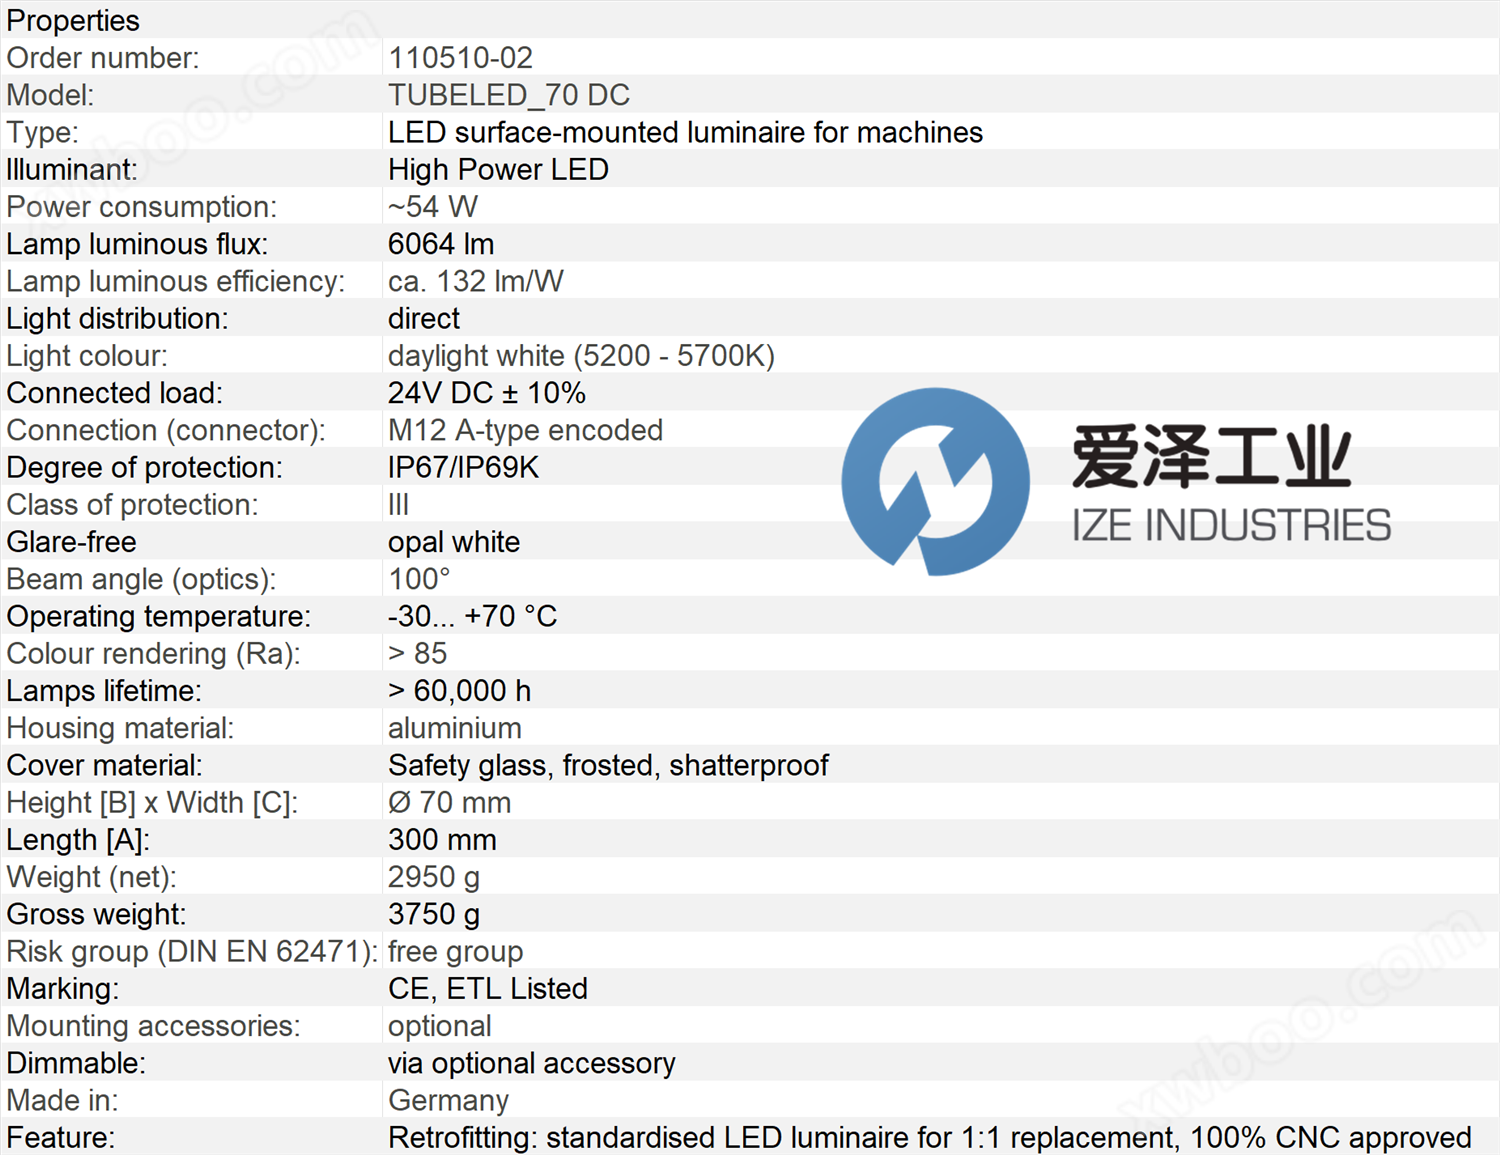 <strong>LED2WORK灯管110510-02</strong> 爱泽工业 izeindustries.png